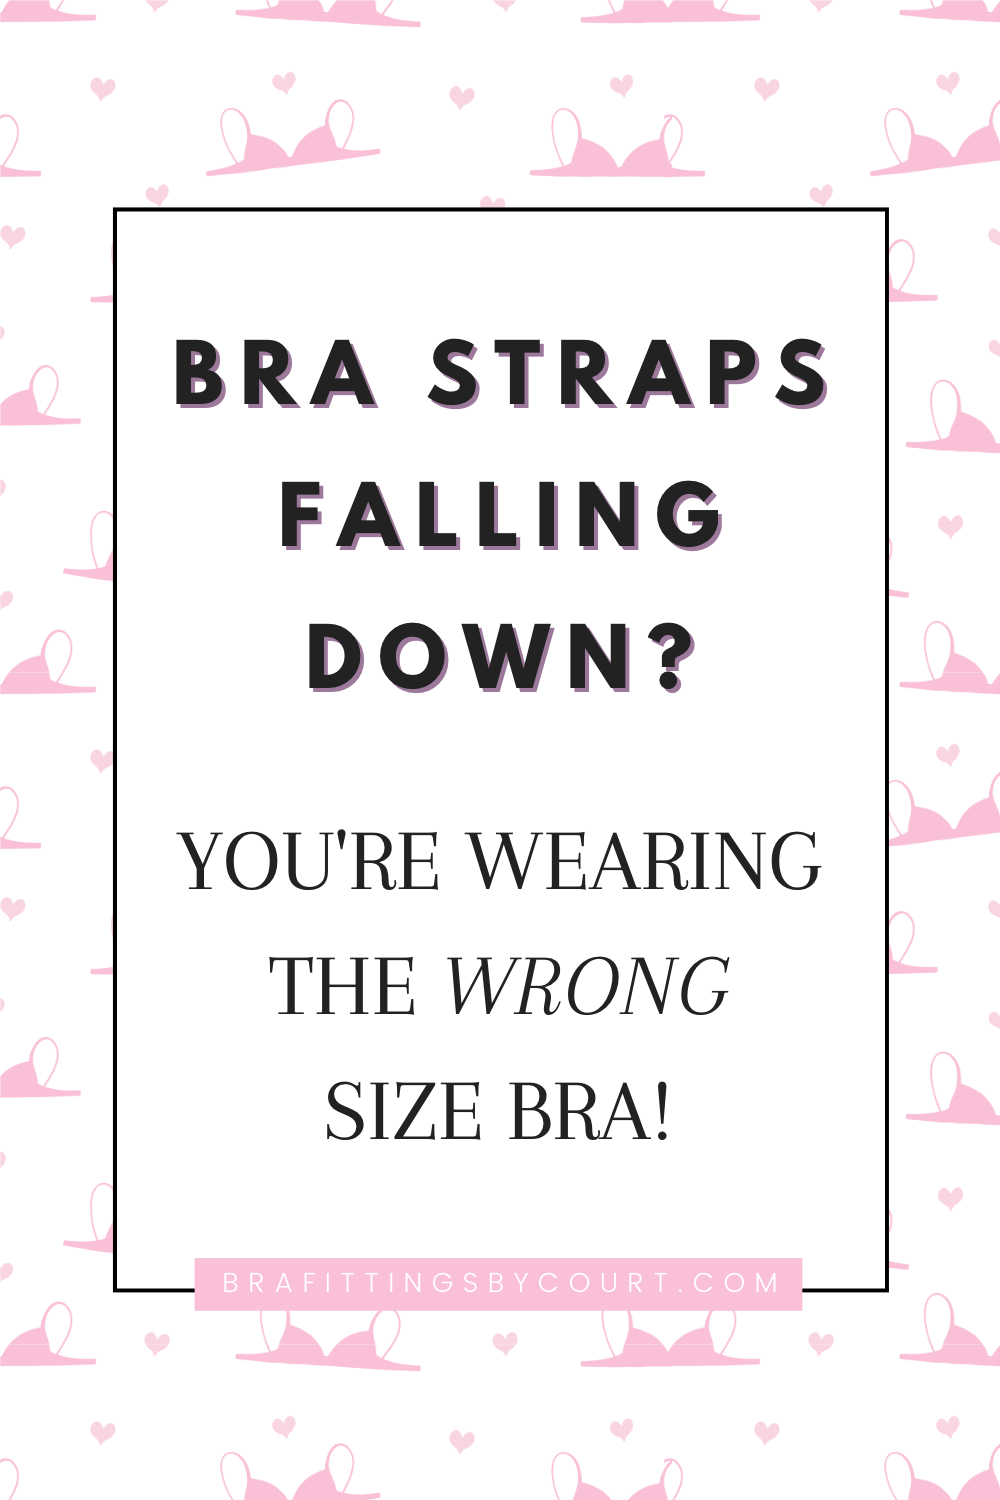 Now this is a simple one ladies - if your bra straps keep falling